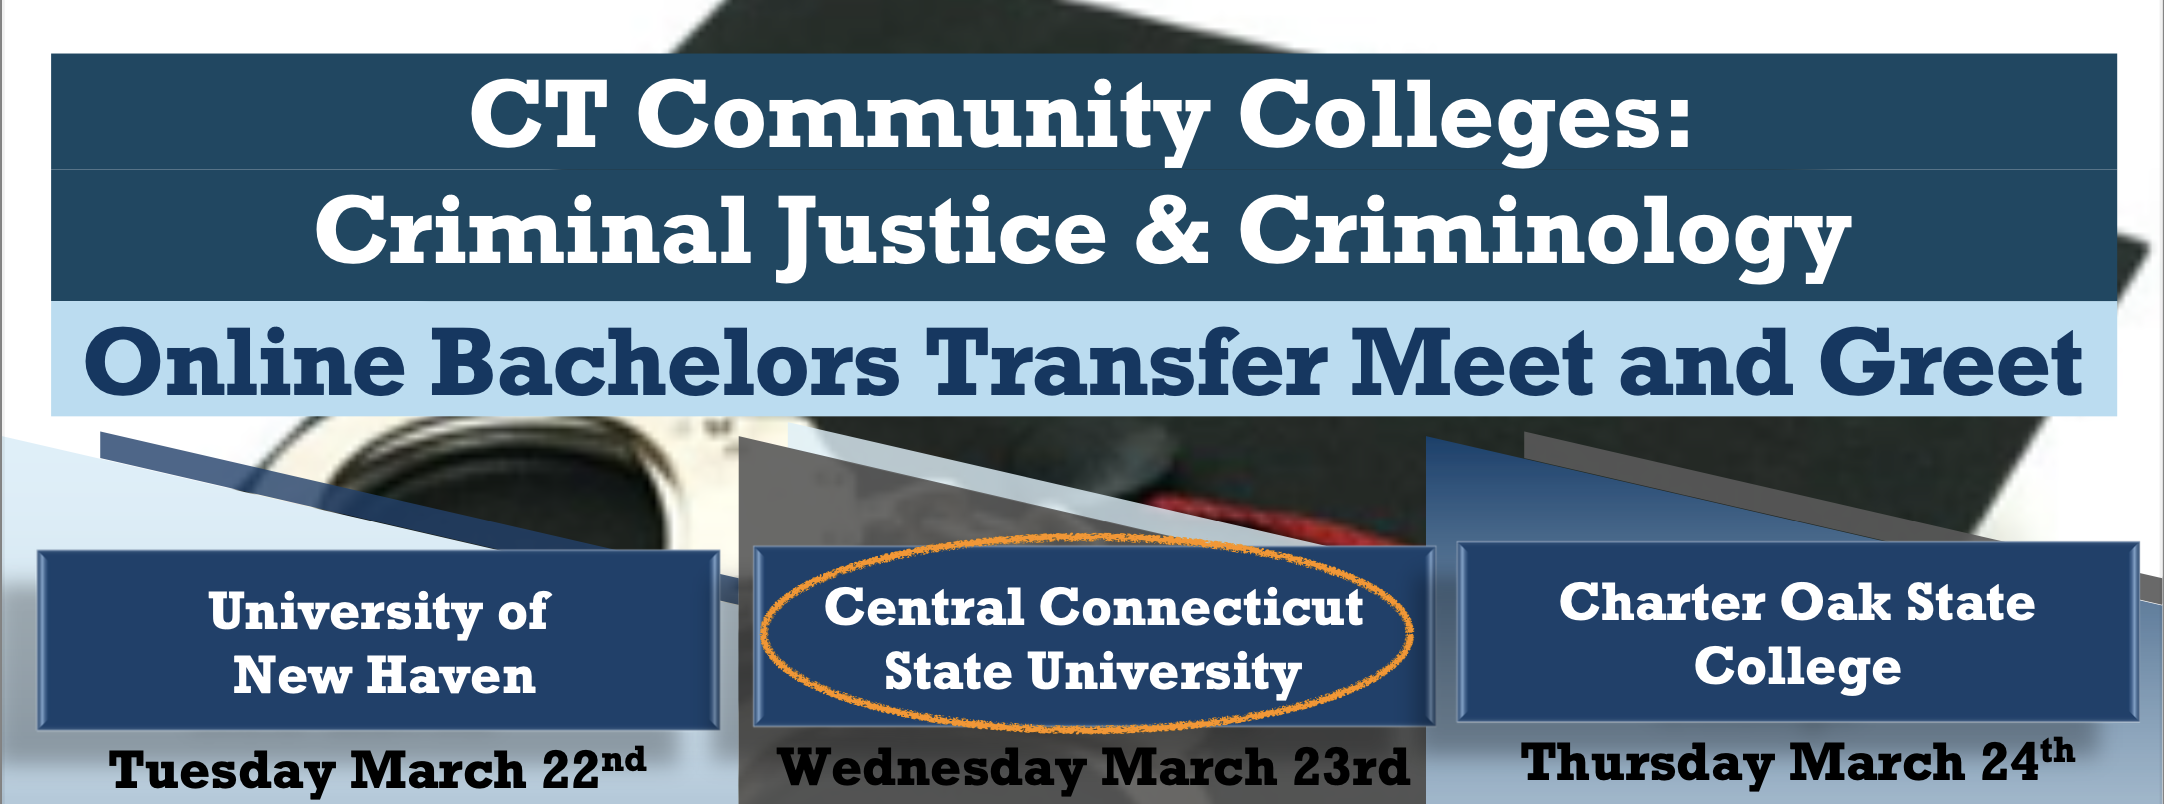 Header for Central Connecticut State University's portion of the CT Community College Colleges Criminal Justice & Criminology Online Bachelors Transfer Meet and Greet on March 23, 2022